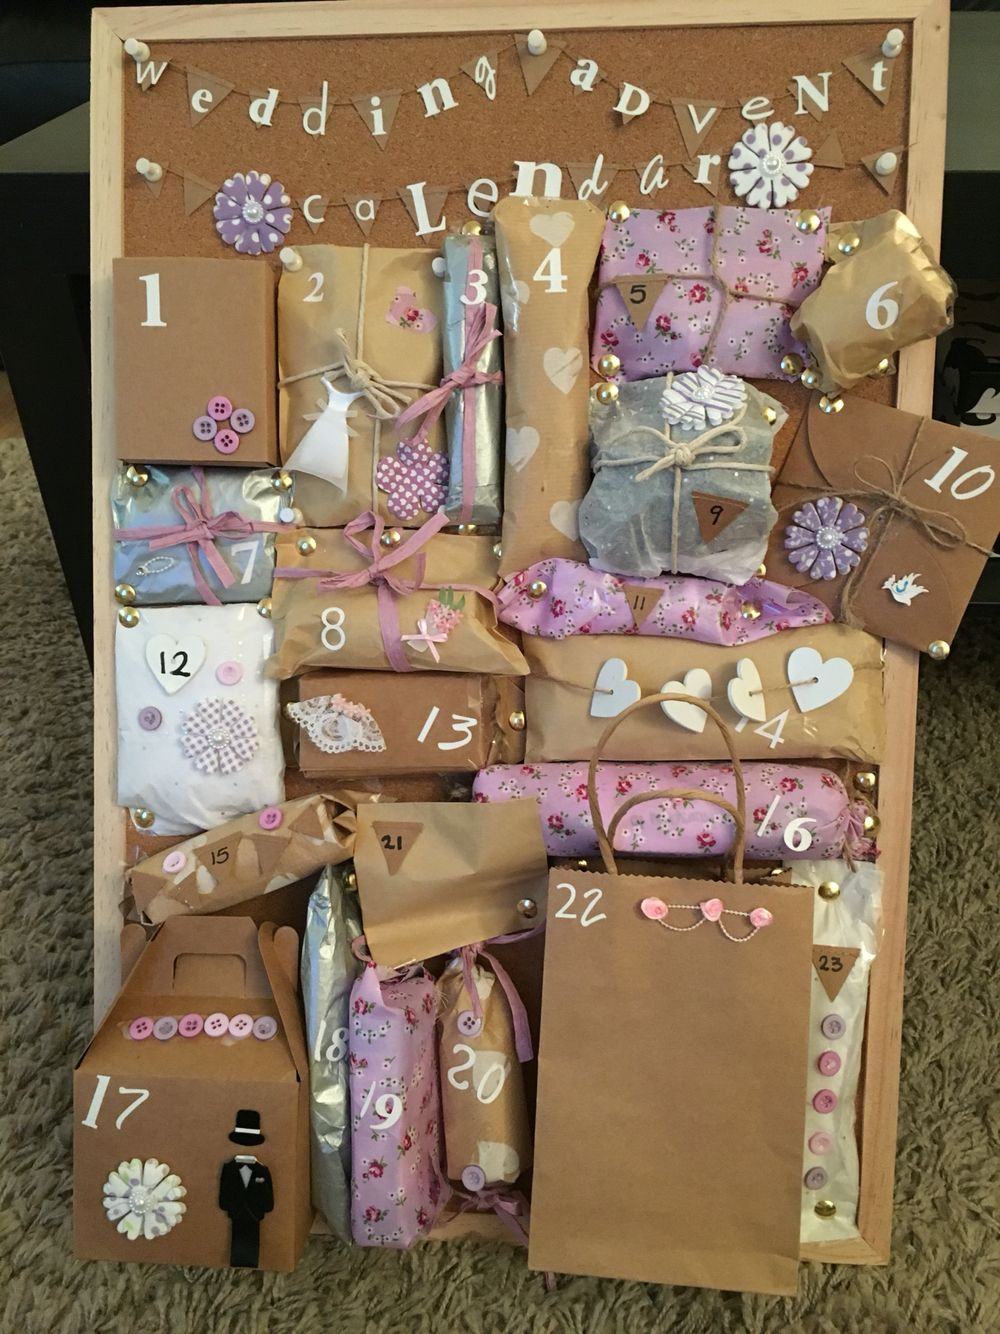 Wedding Gift Ideas For Friends Who Have Everything
 Made this wedding advent calendar for my best friend who